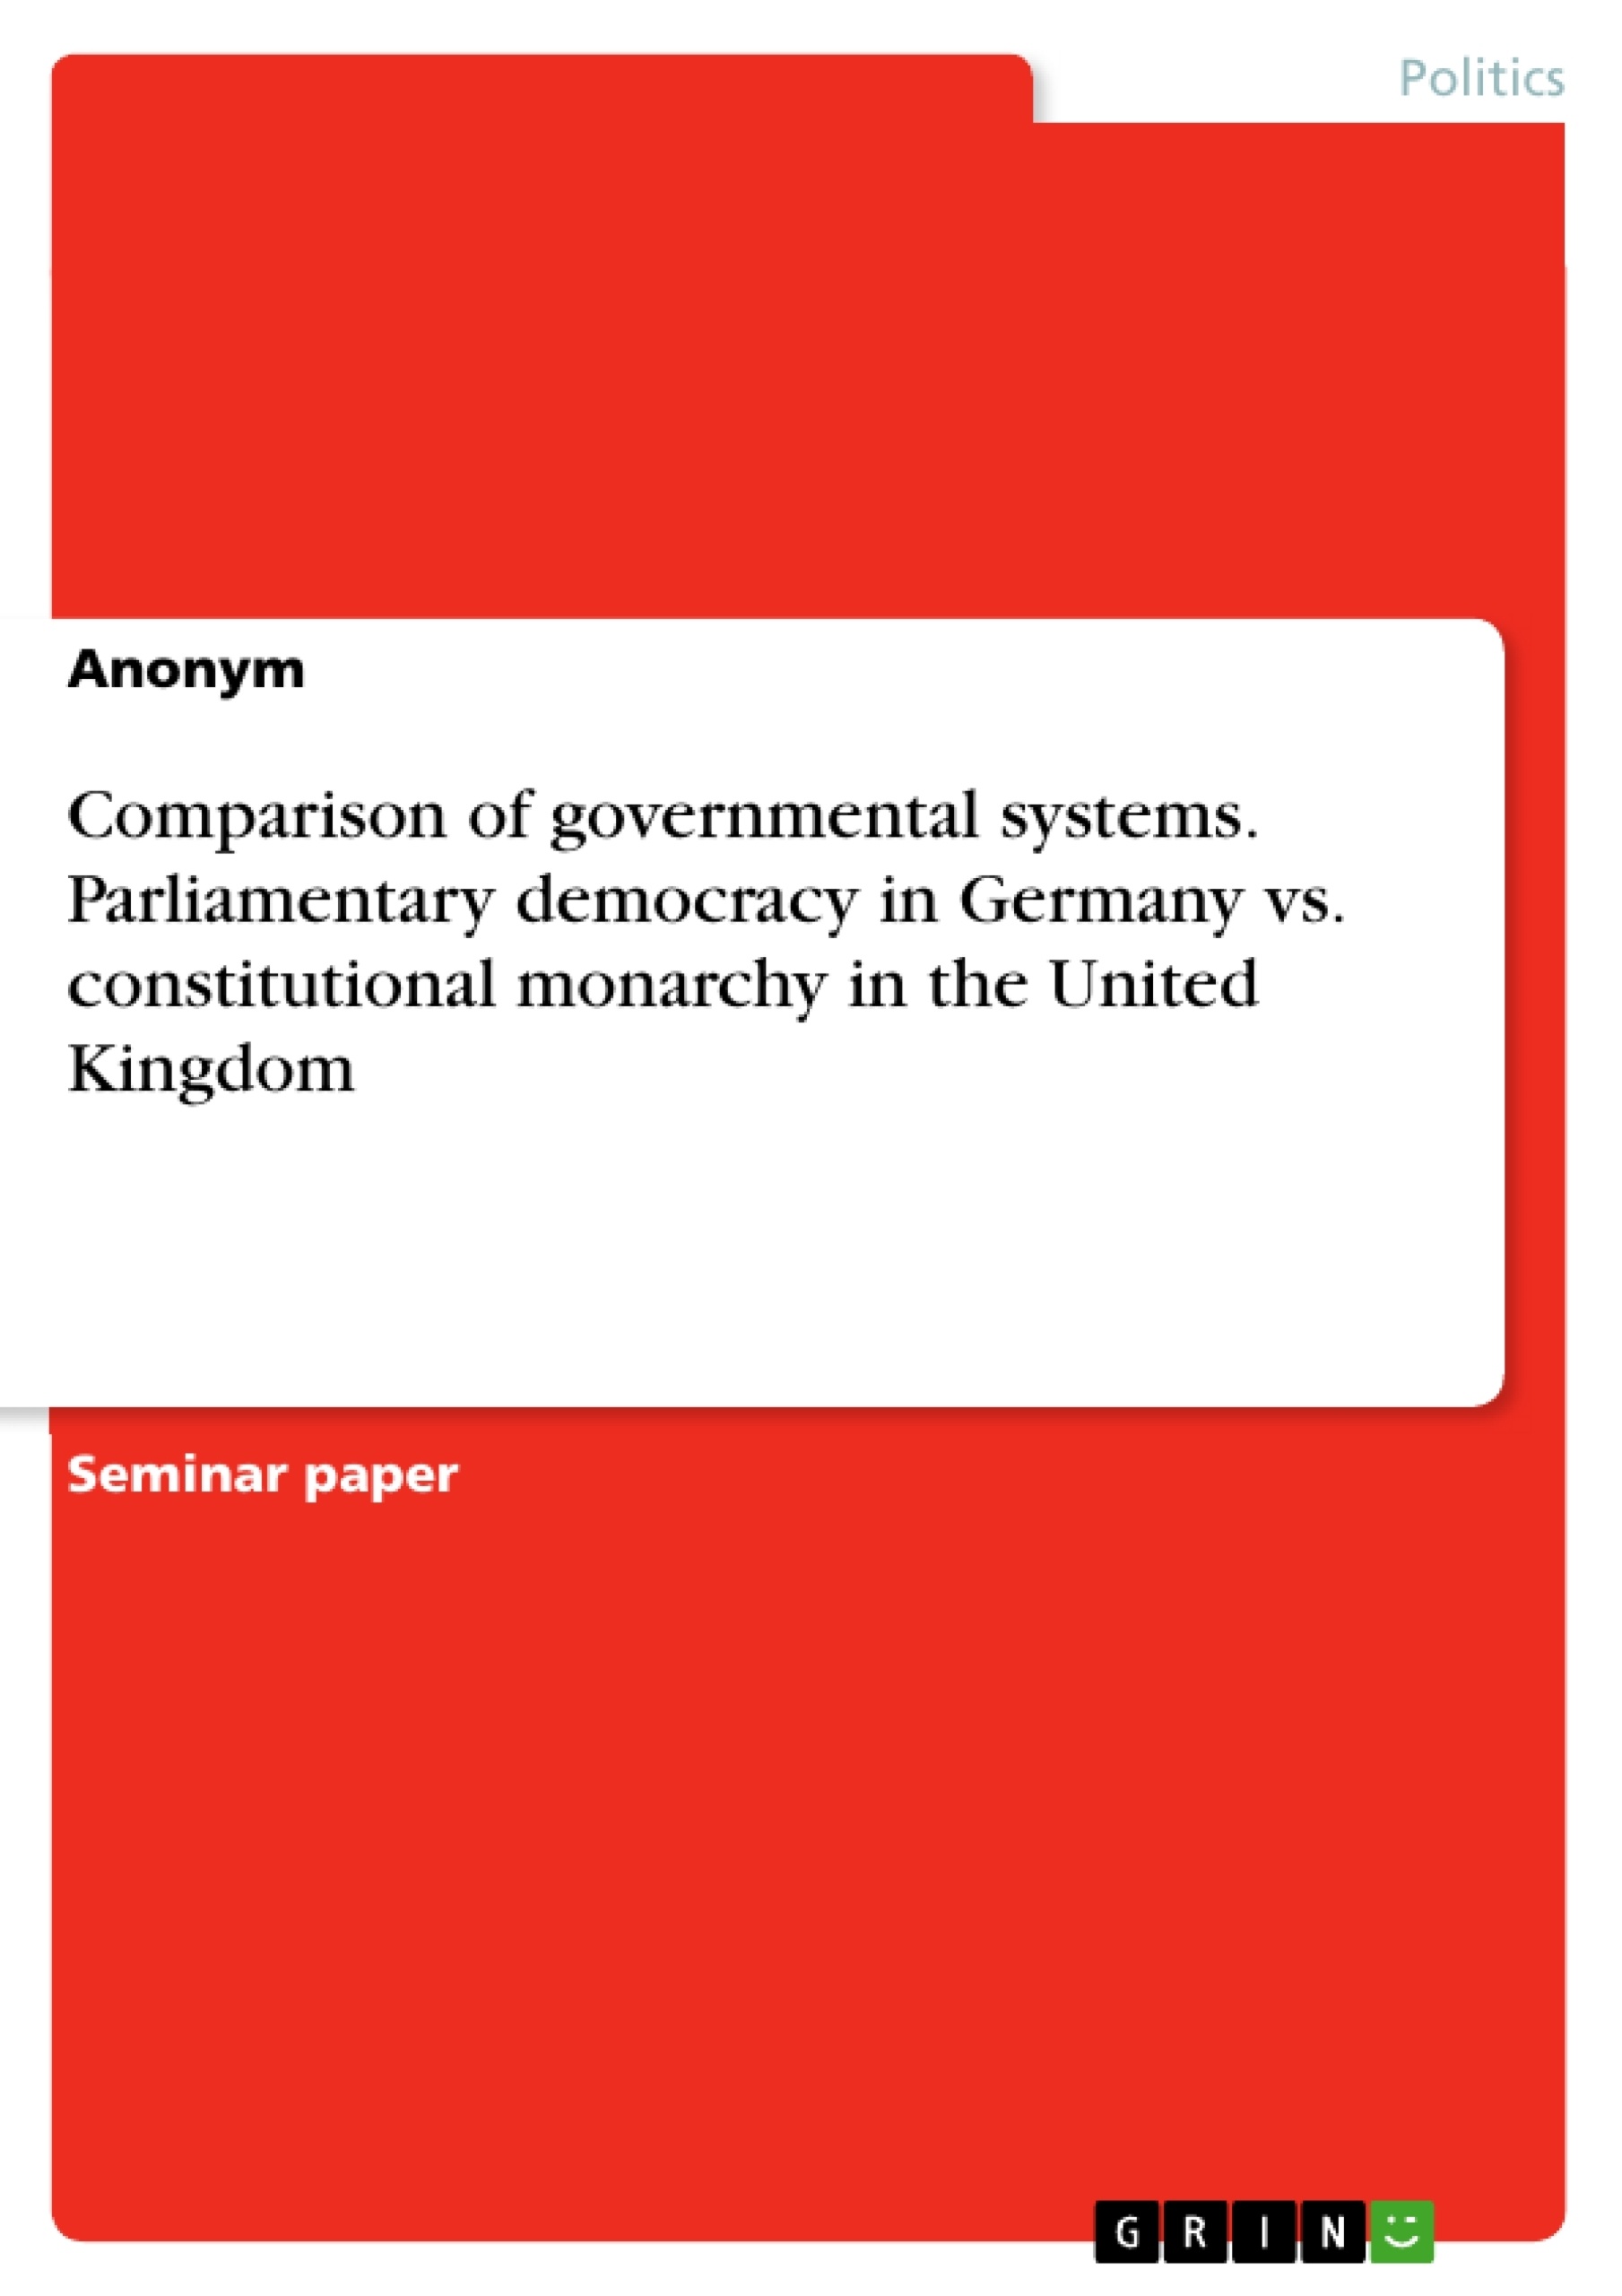 Title: Comparison of governmental systems. Parliamentary democracy in Germany vs. constitutional monarchy in the United Kingdom